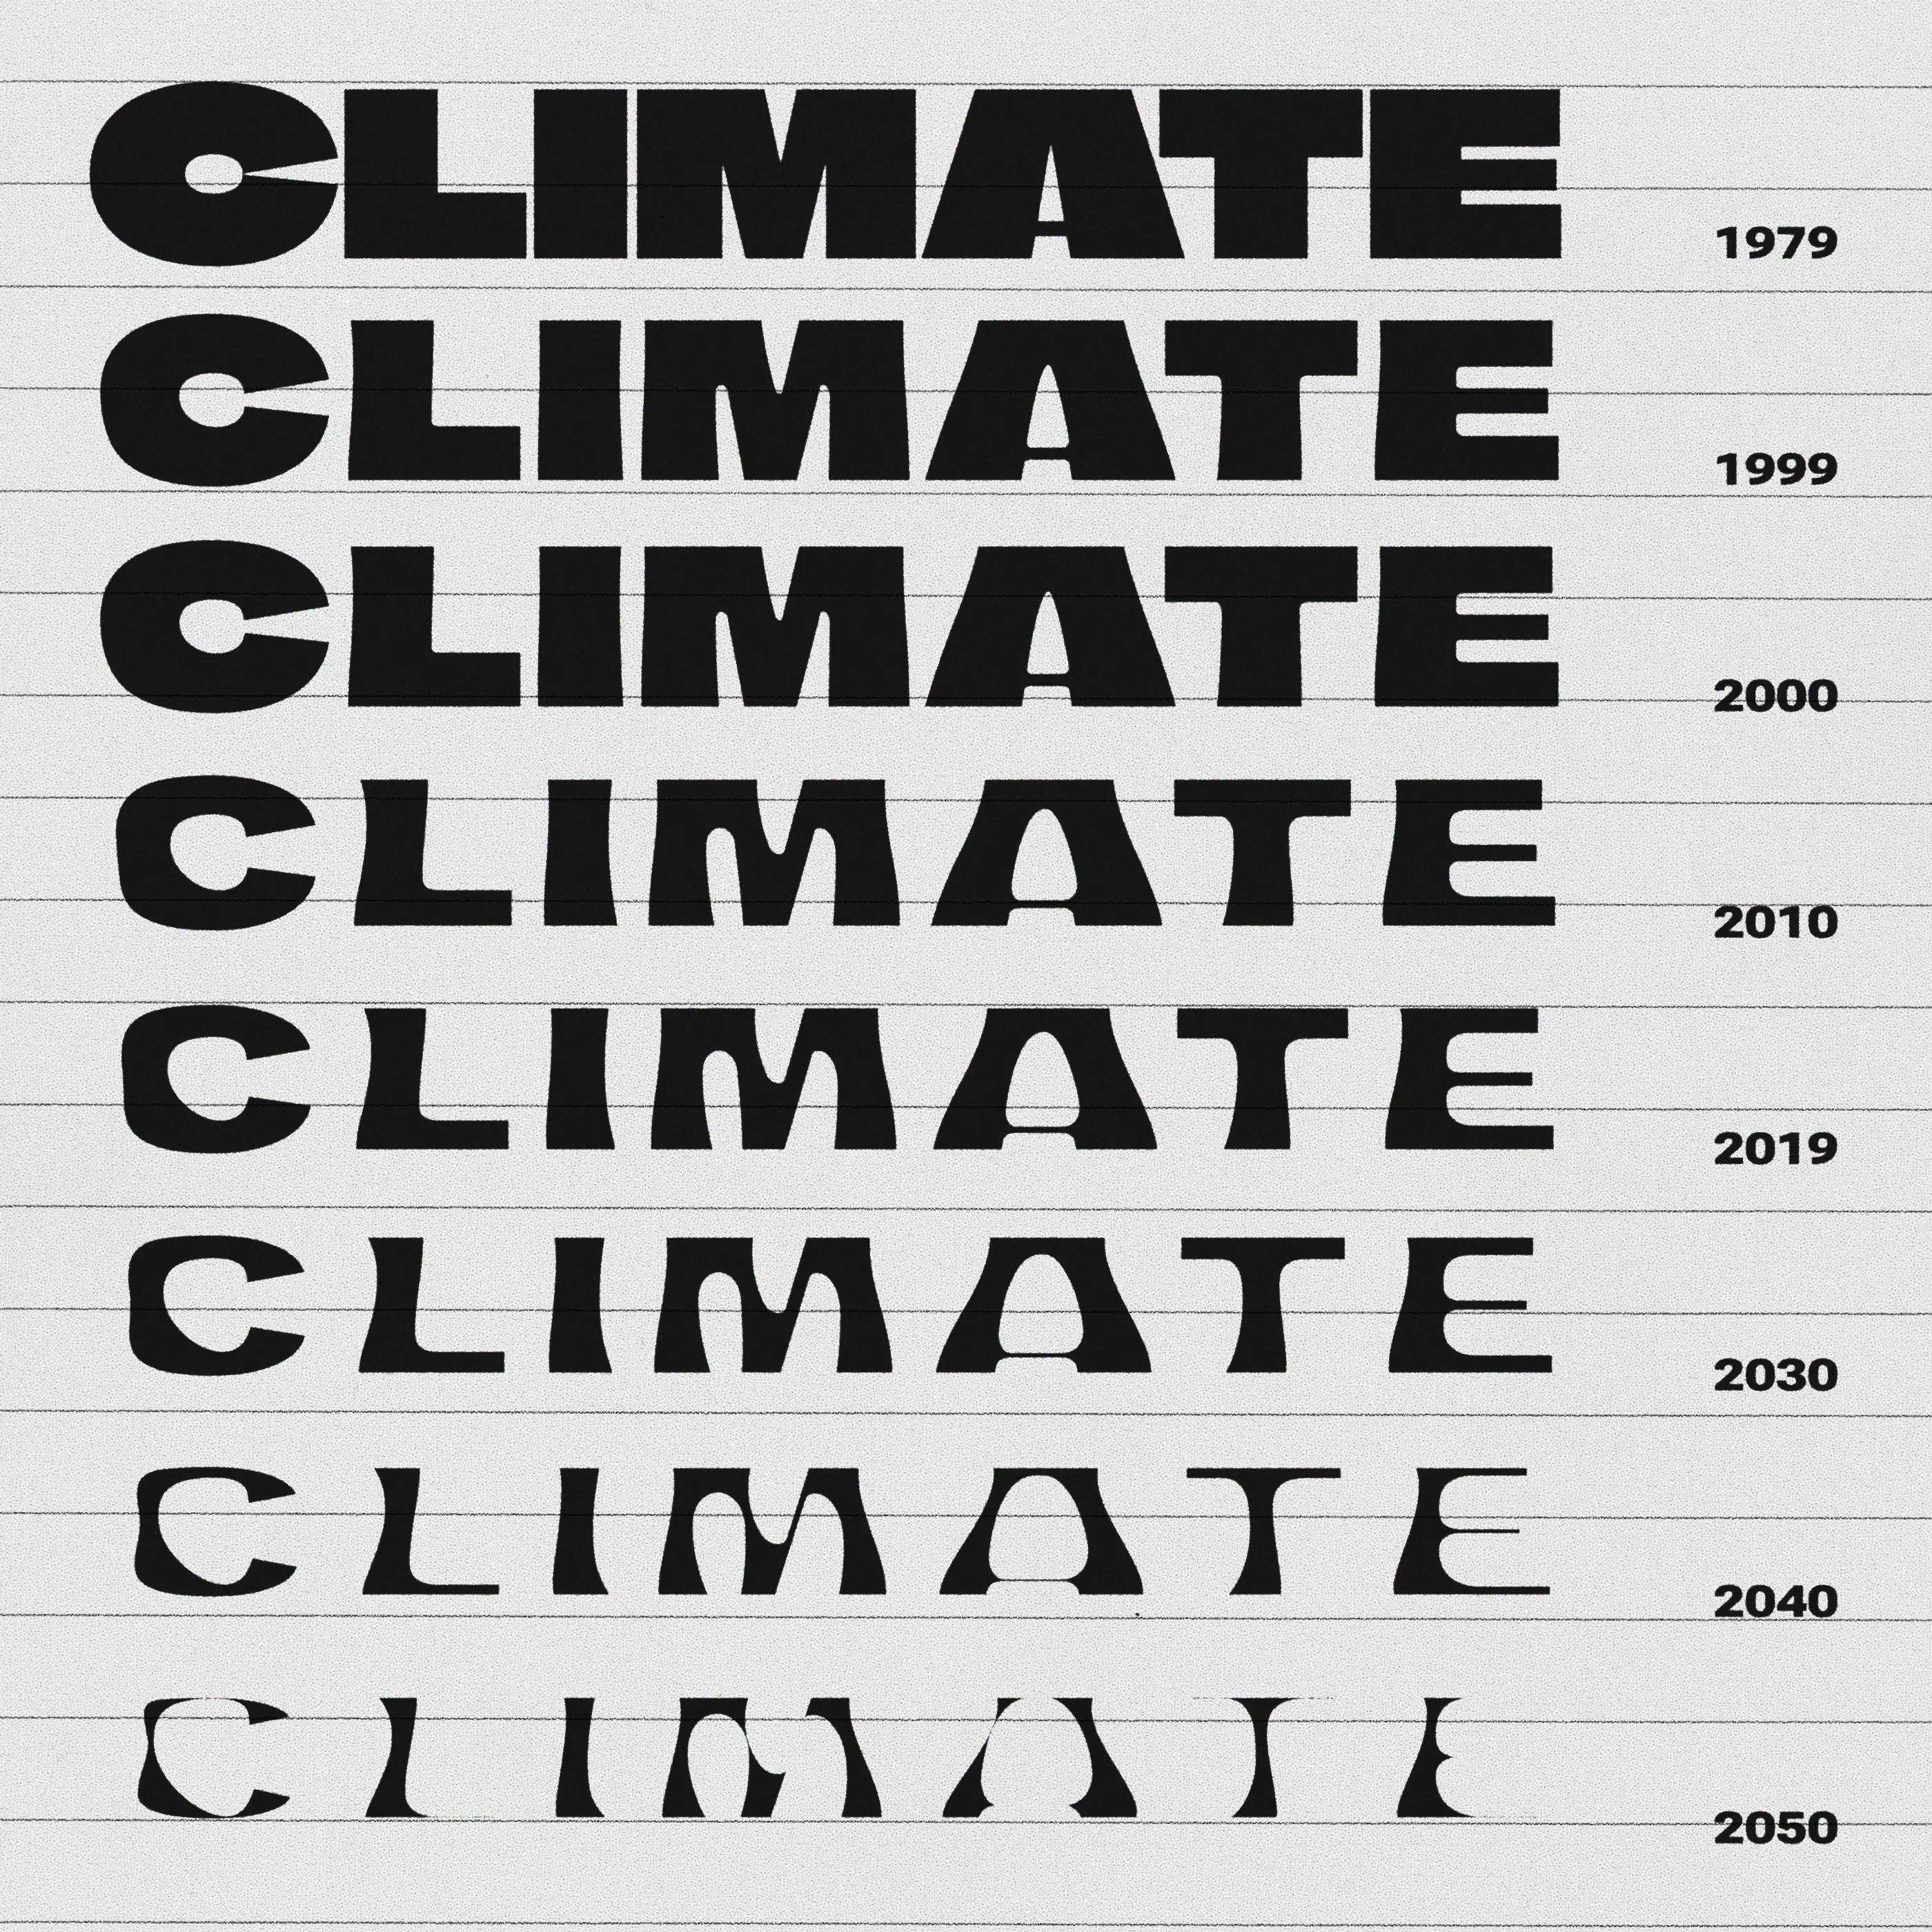 Eight rows of the words “Climate” in different weights, from heaviest (1979) to lightest 2050